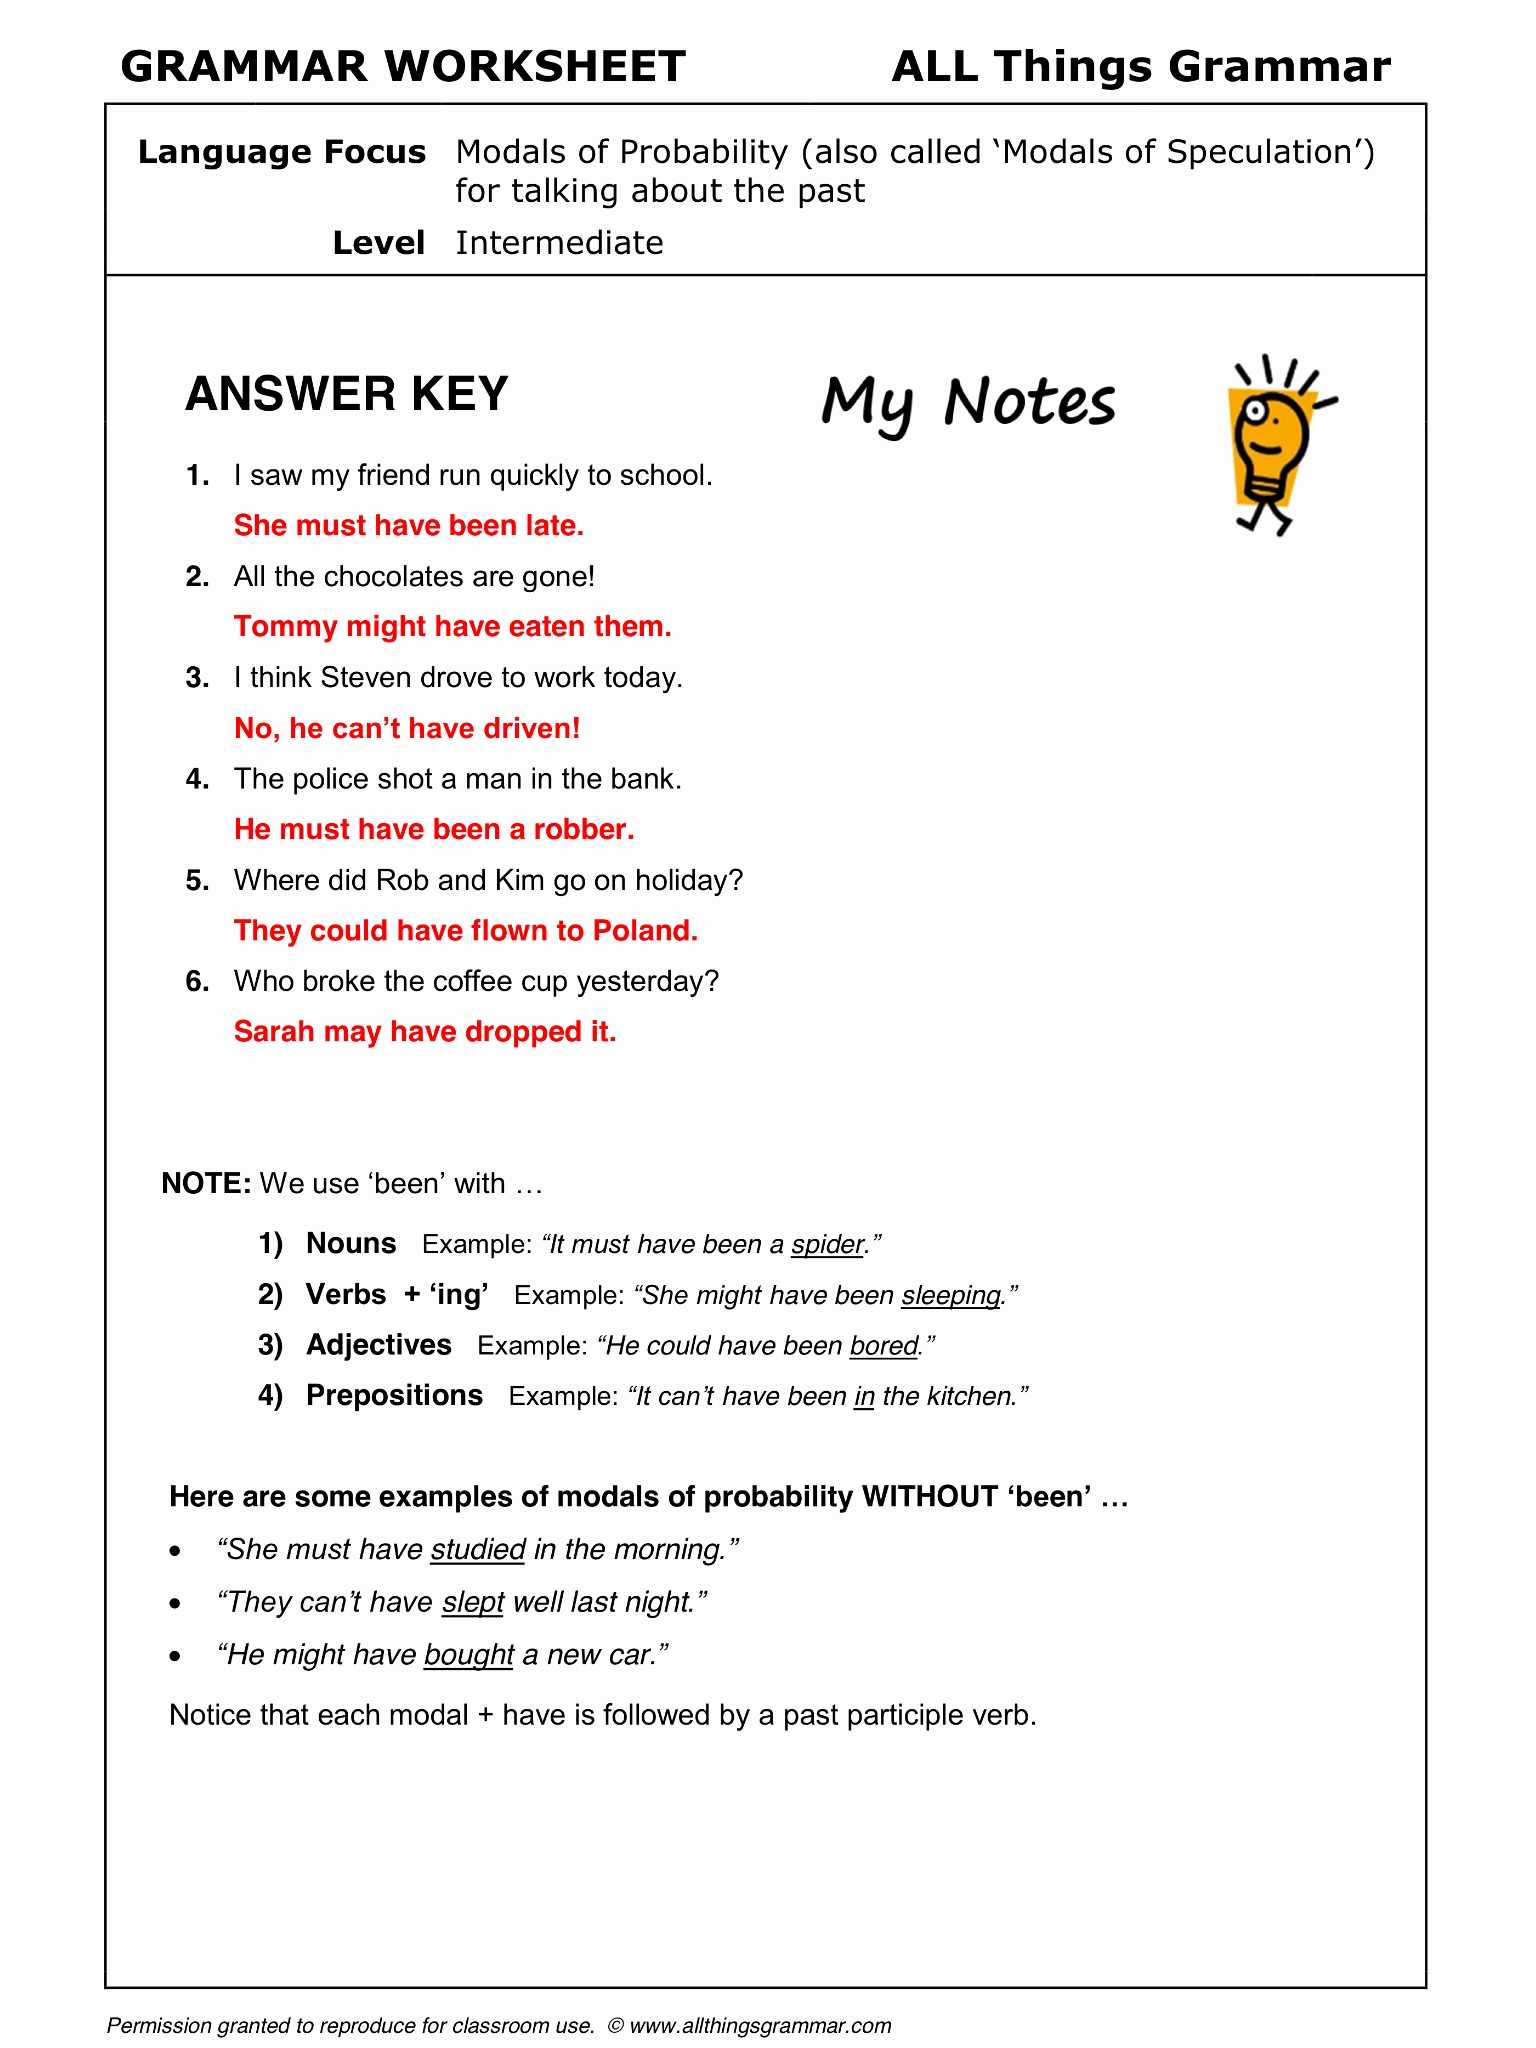 Adjectives Worksheet 3 Spanish Answers together with 16 Best Worksheet In Spanish